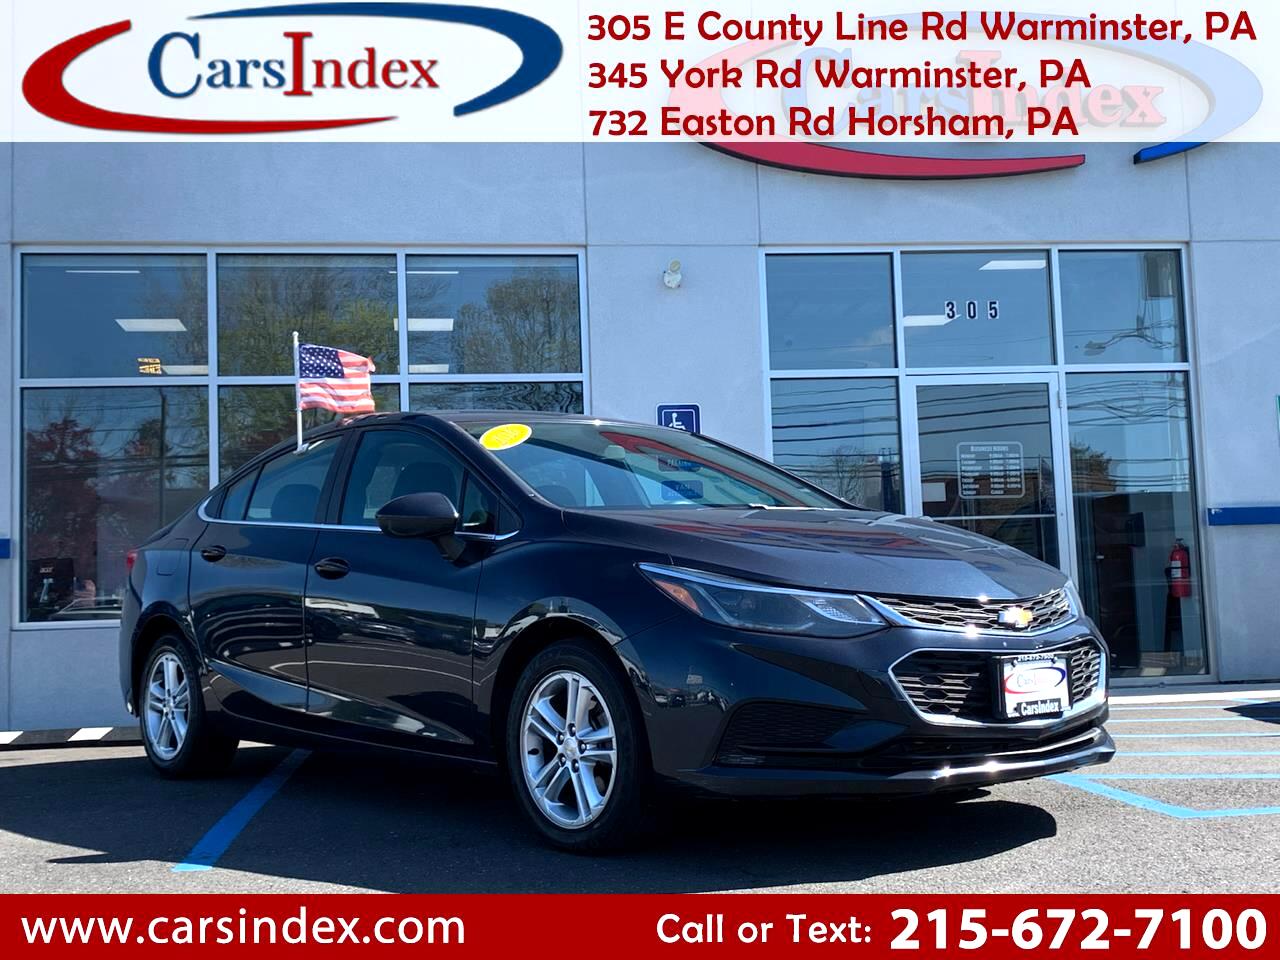 Used Chevrolet Cruze Warminster Pa